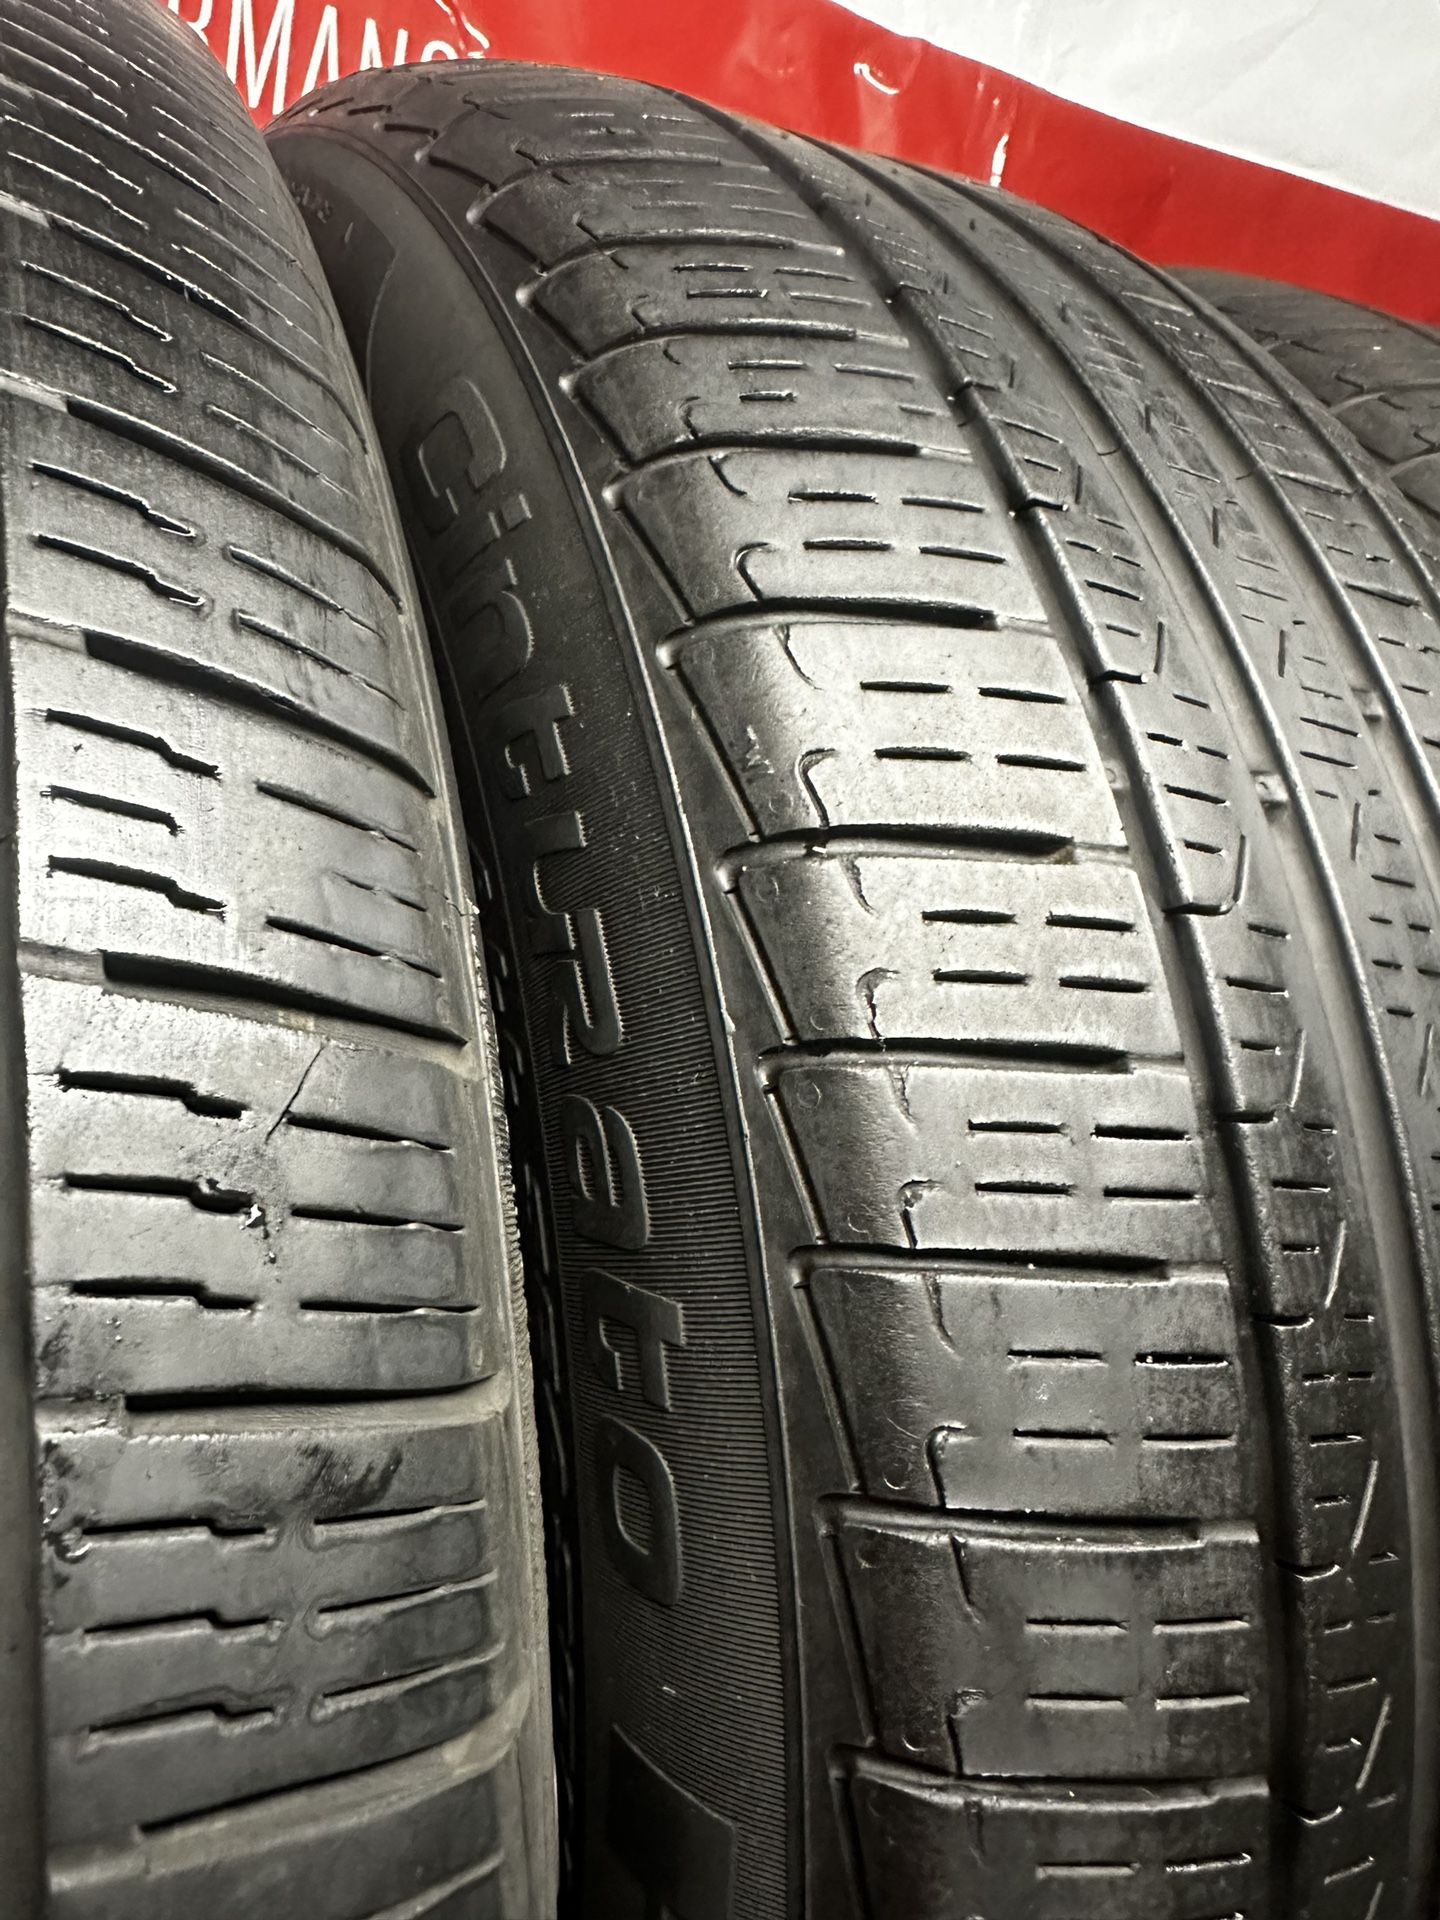 Perelli Tires 225/50 R 18 Excellent Condition Three Tires For $100